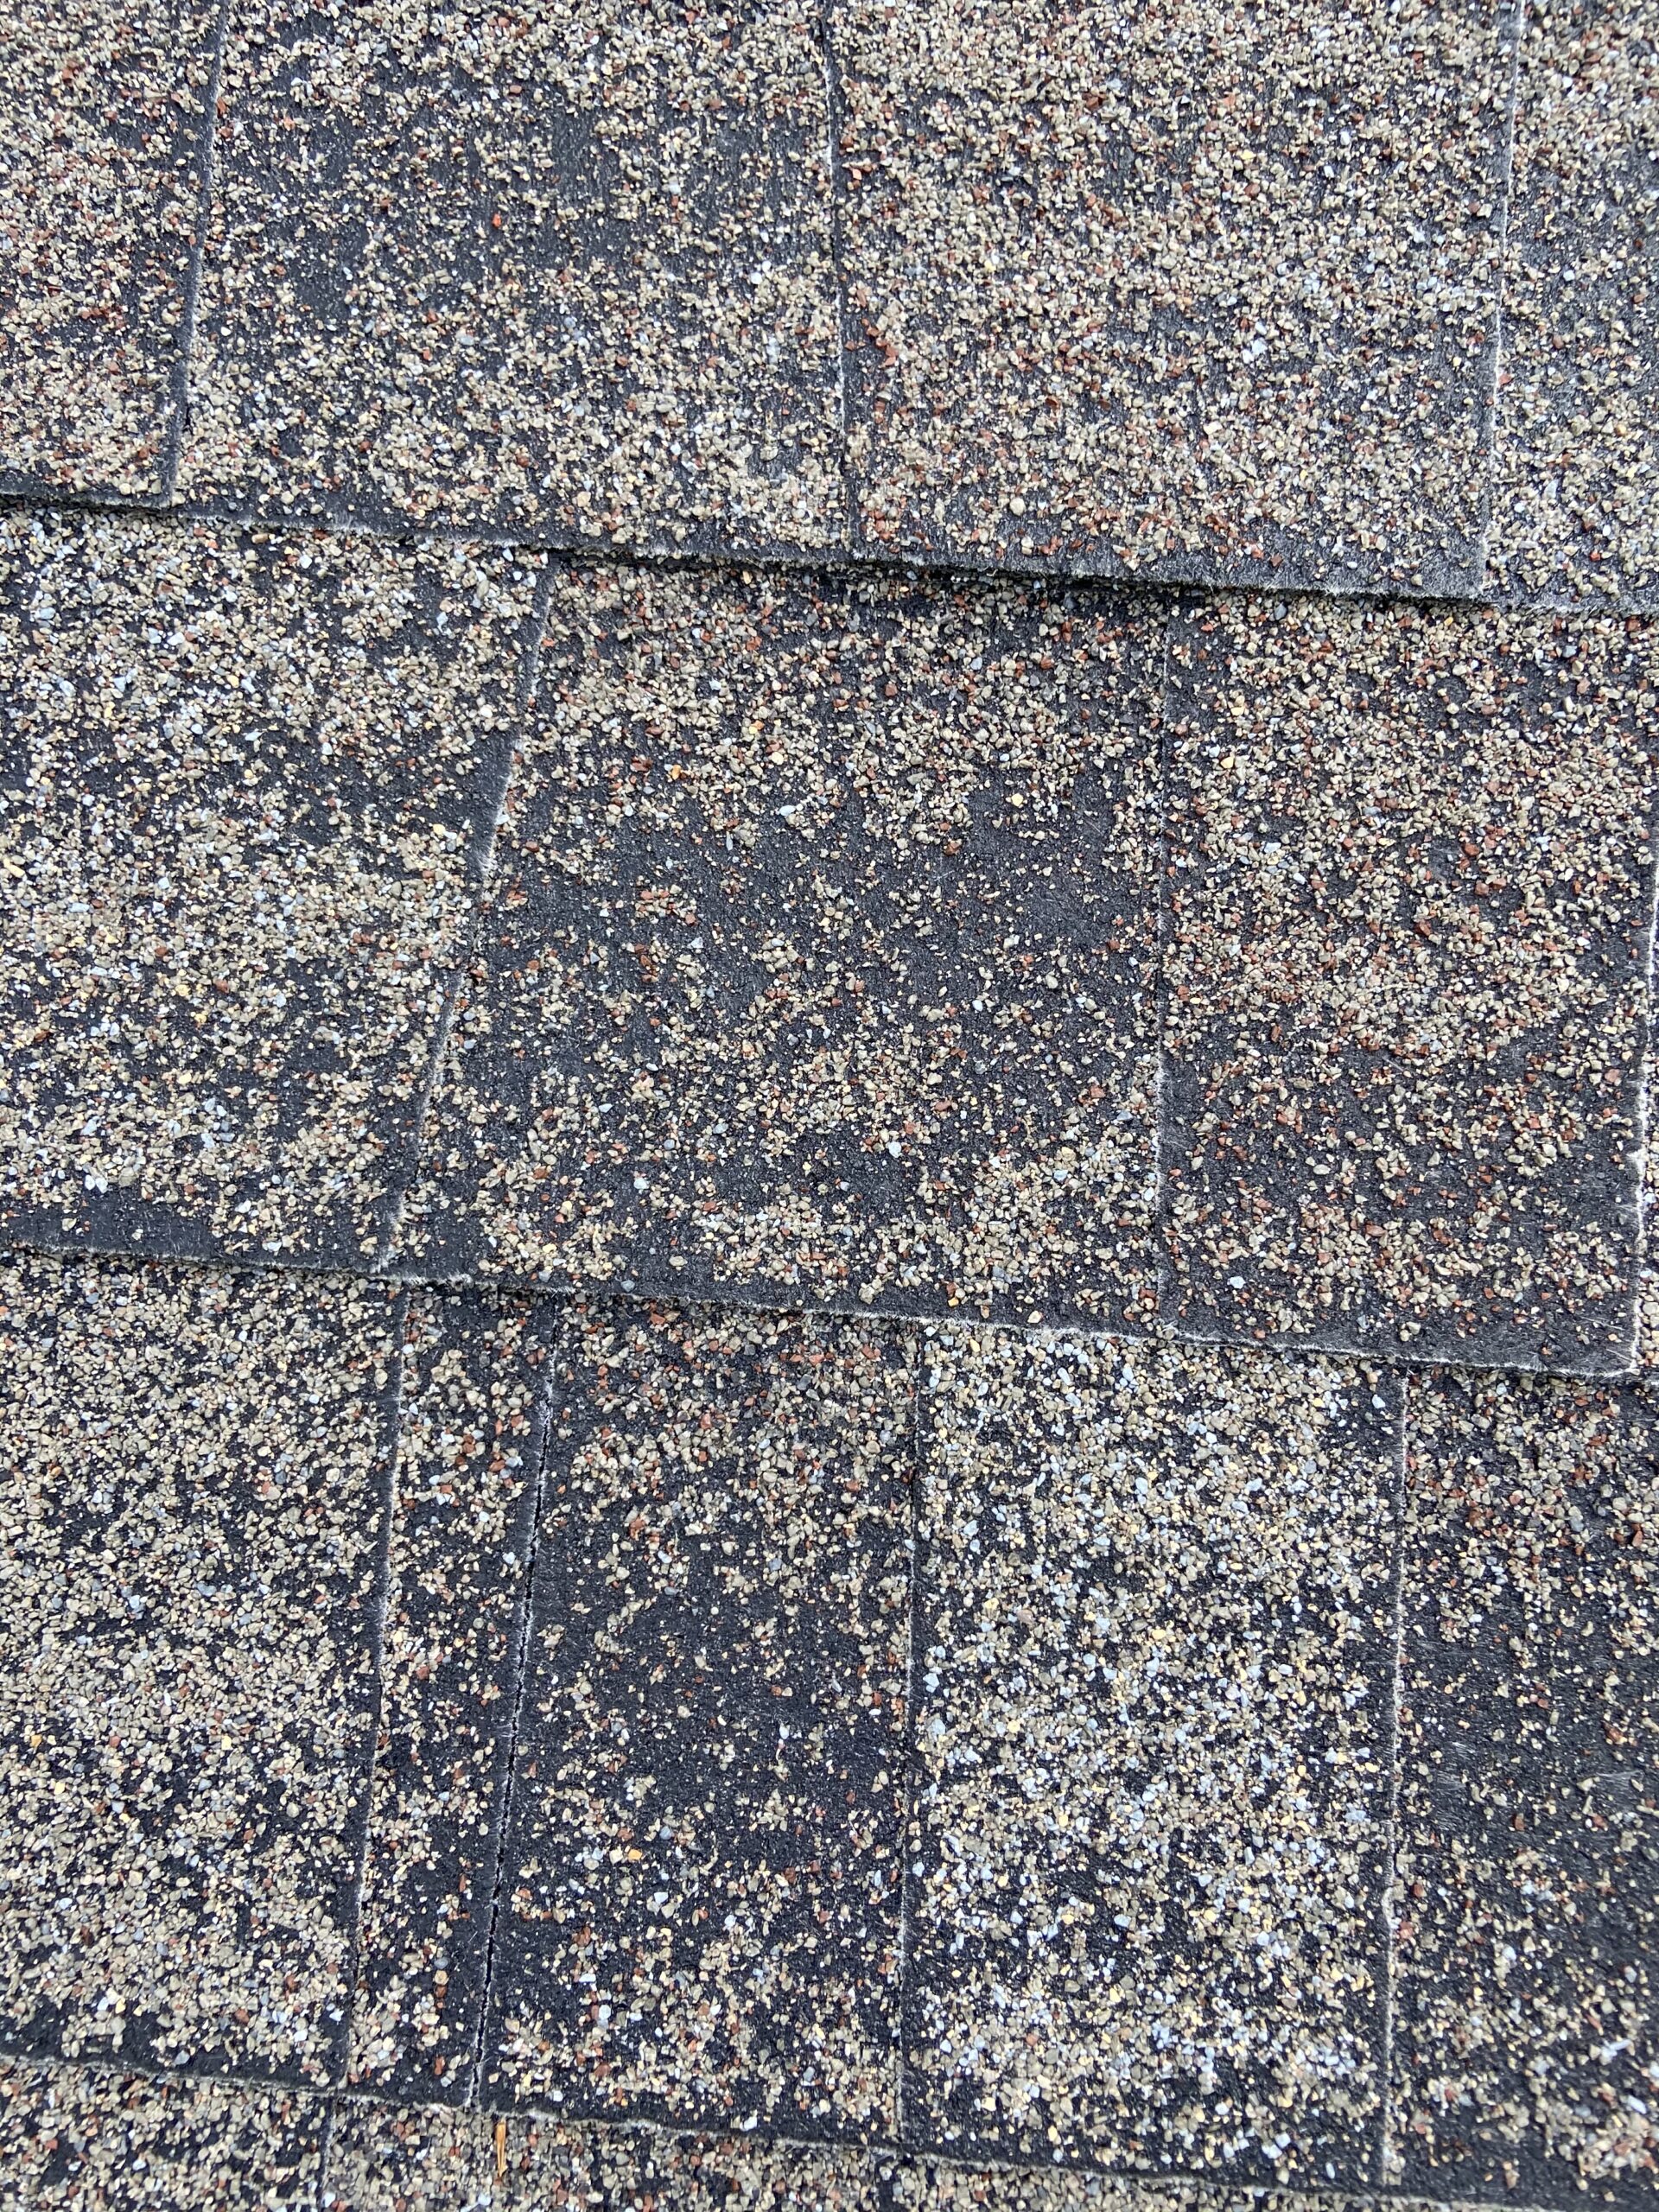 Worn out roofing shingles